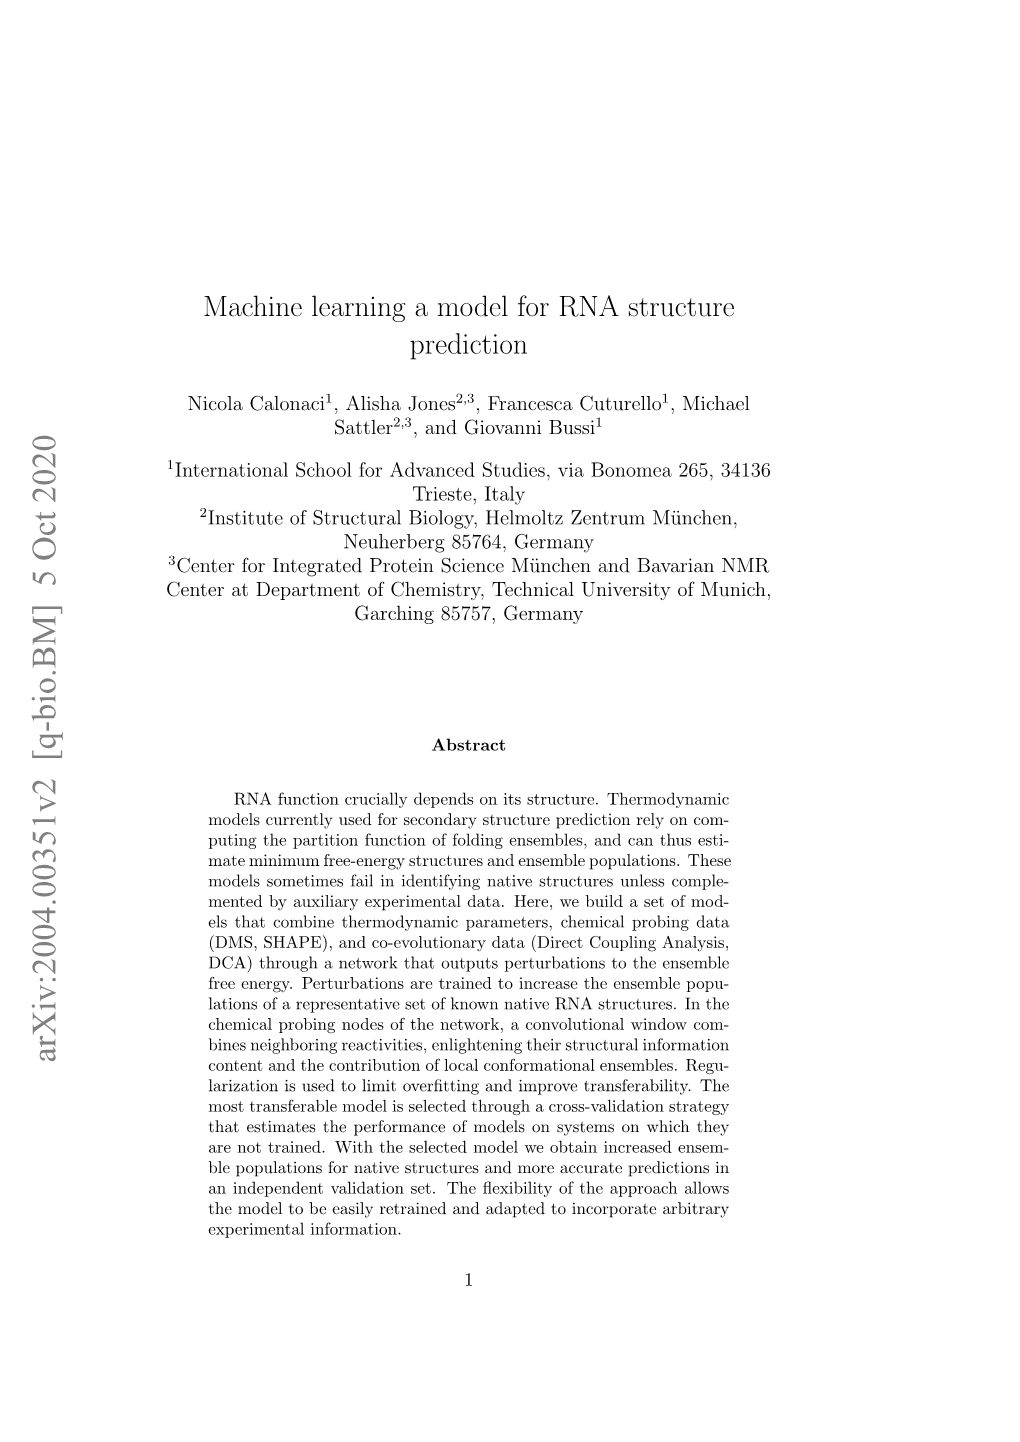 Machine Learning a Model for RNA Structure Prediction